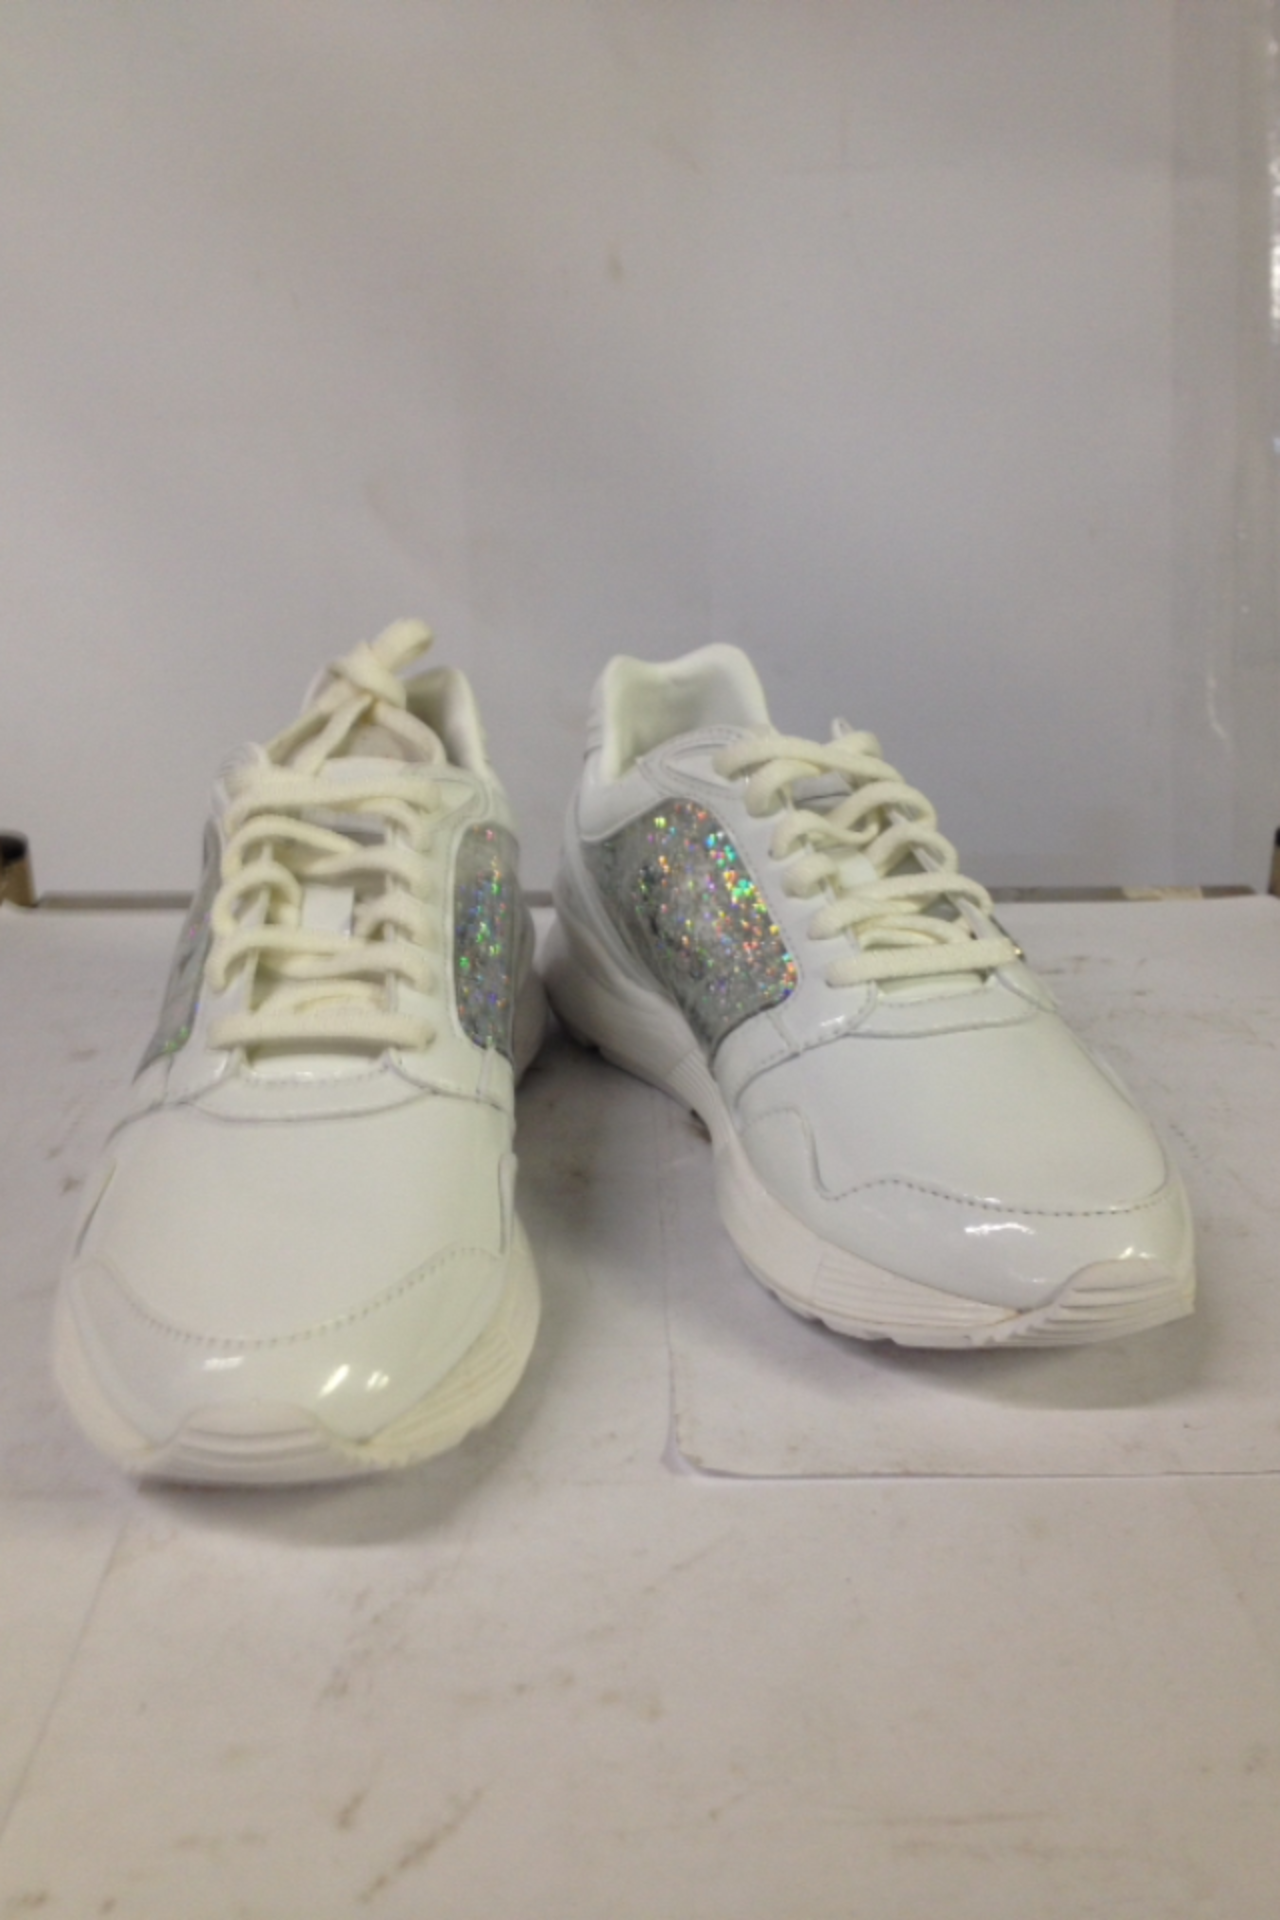 1 x Le Coq Sportif Trainers | Omega x W Snowflakes | Colour: Optical White | UK Size: 6 | RRP £ 124 - Image 2 of 2